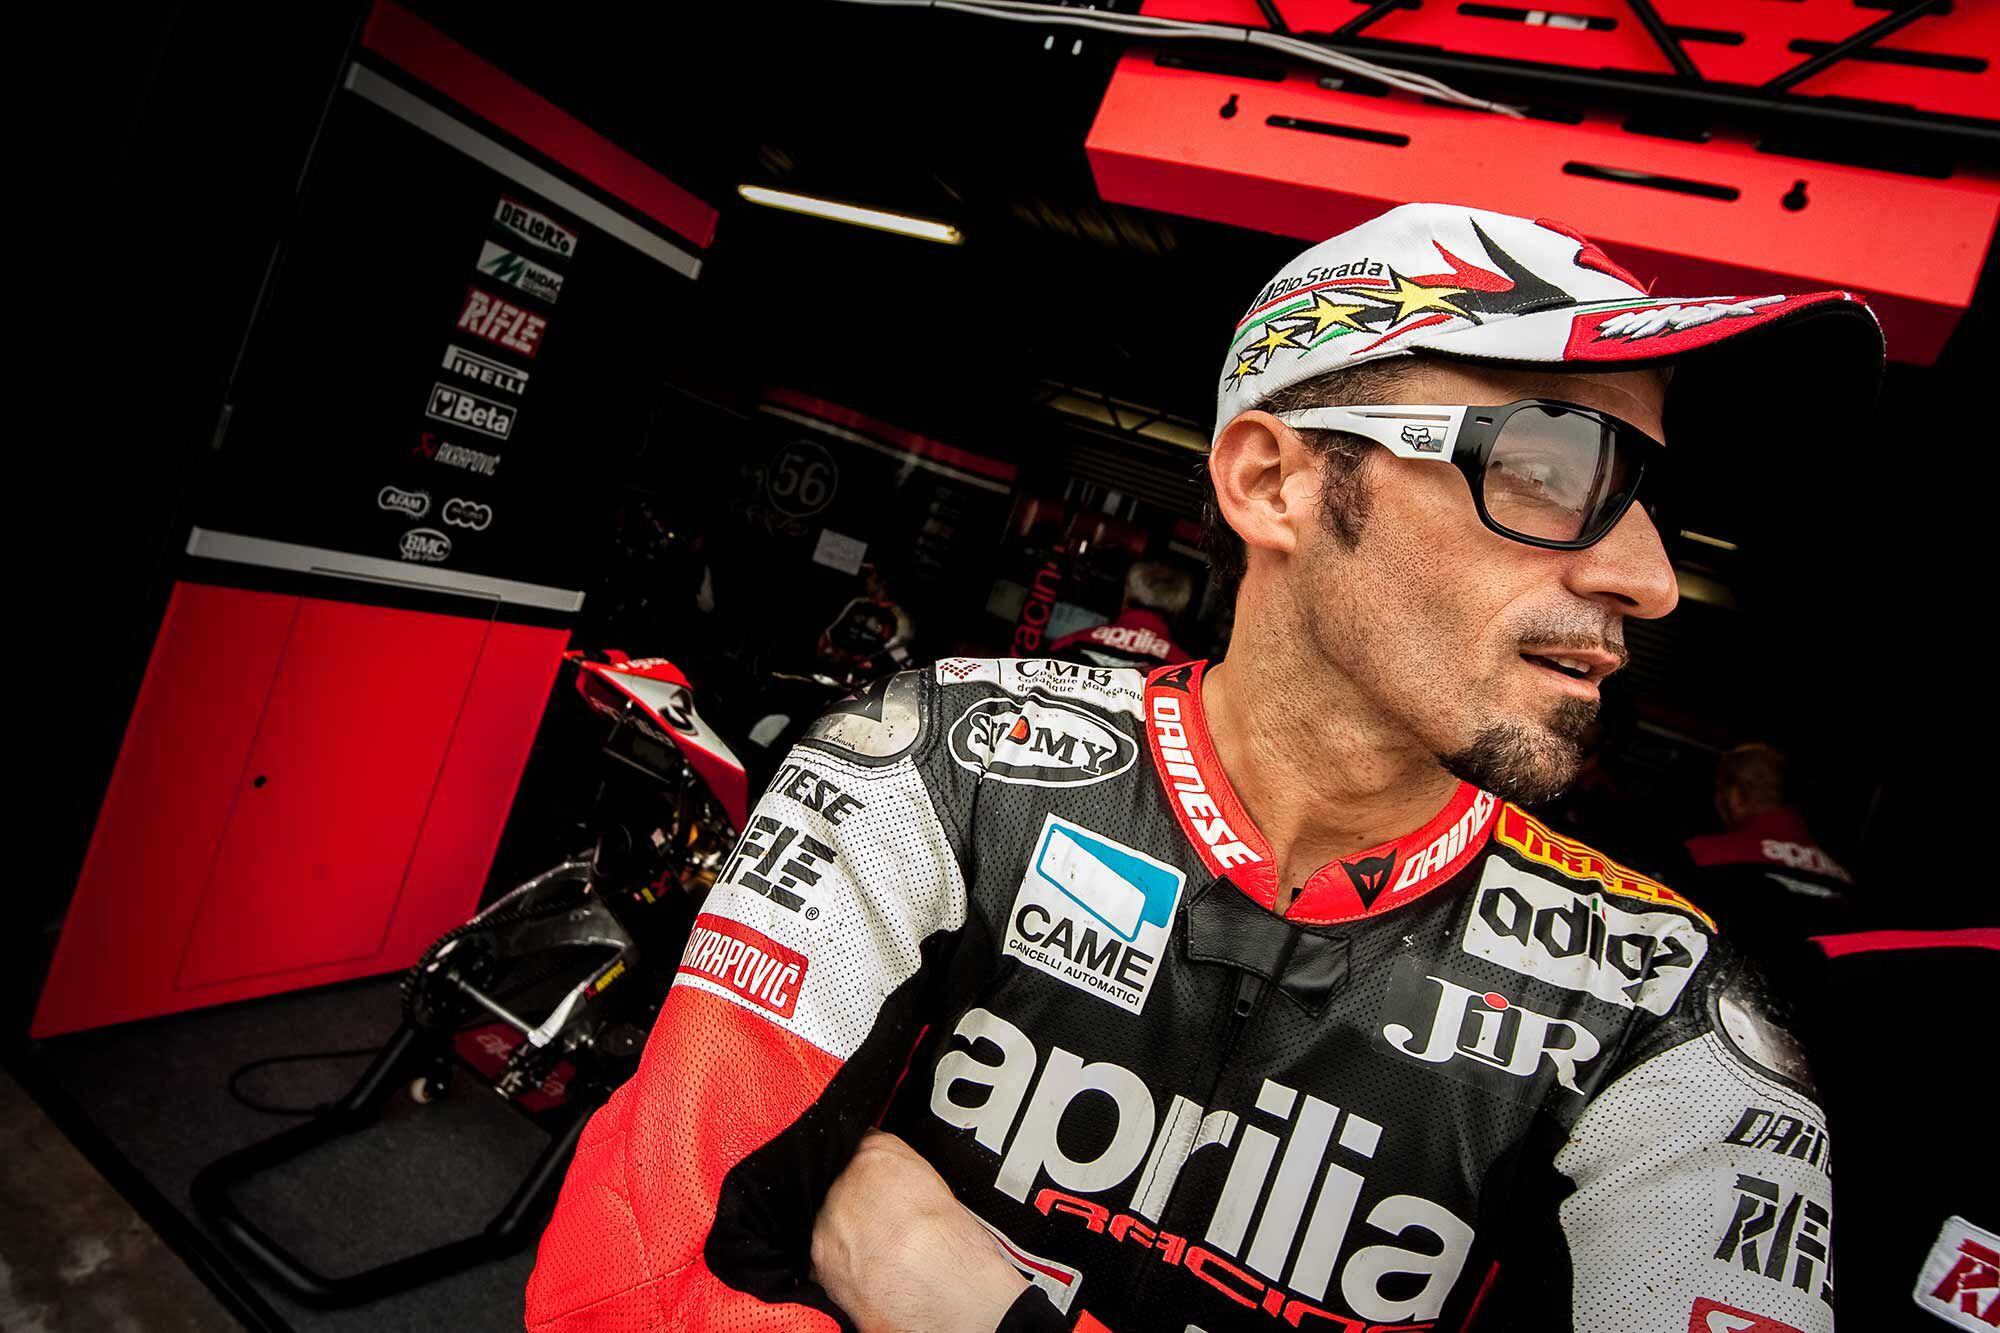 Biaggi retired with a World SBK championship in 2012 at the age of 41.